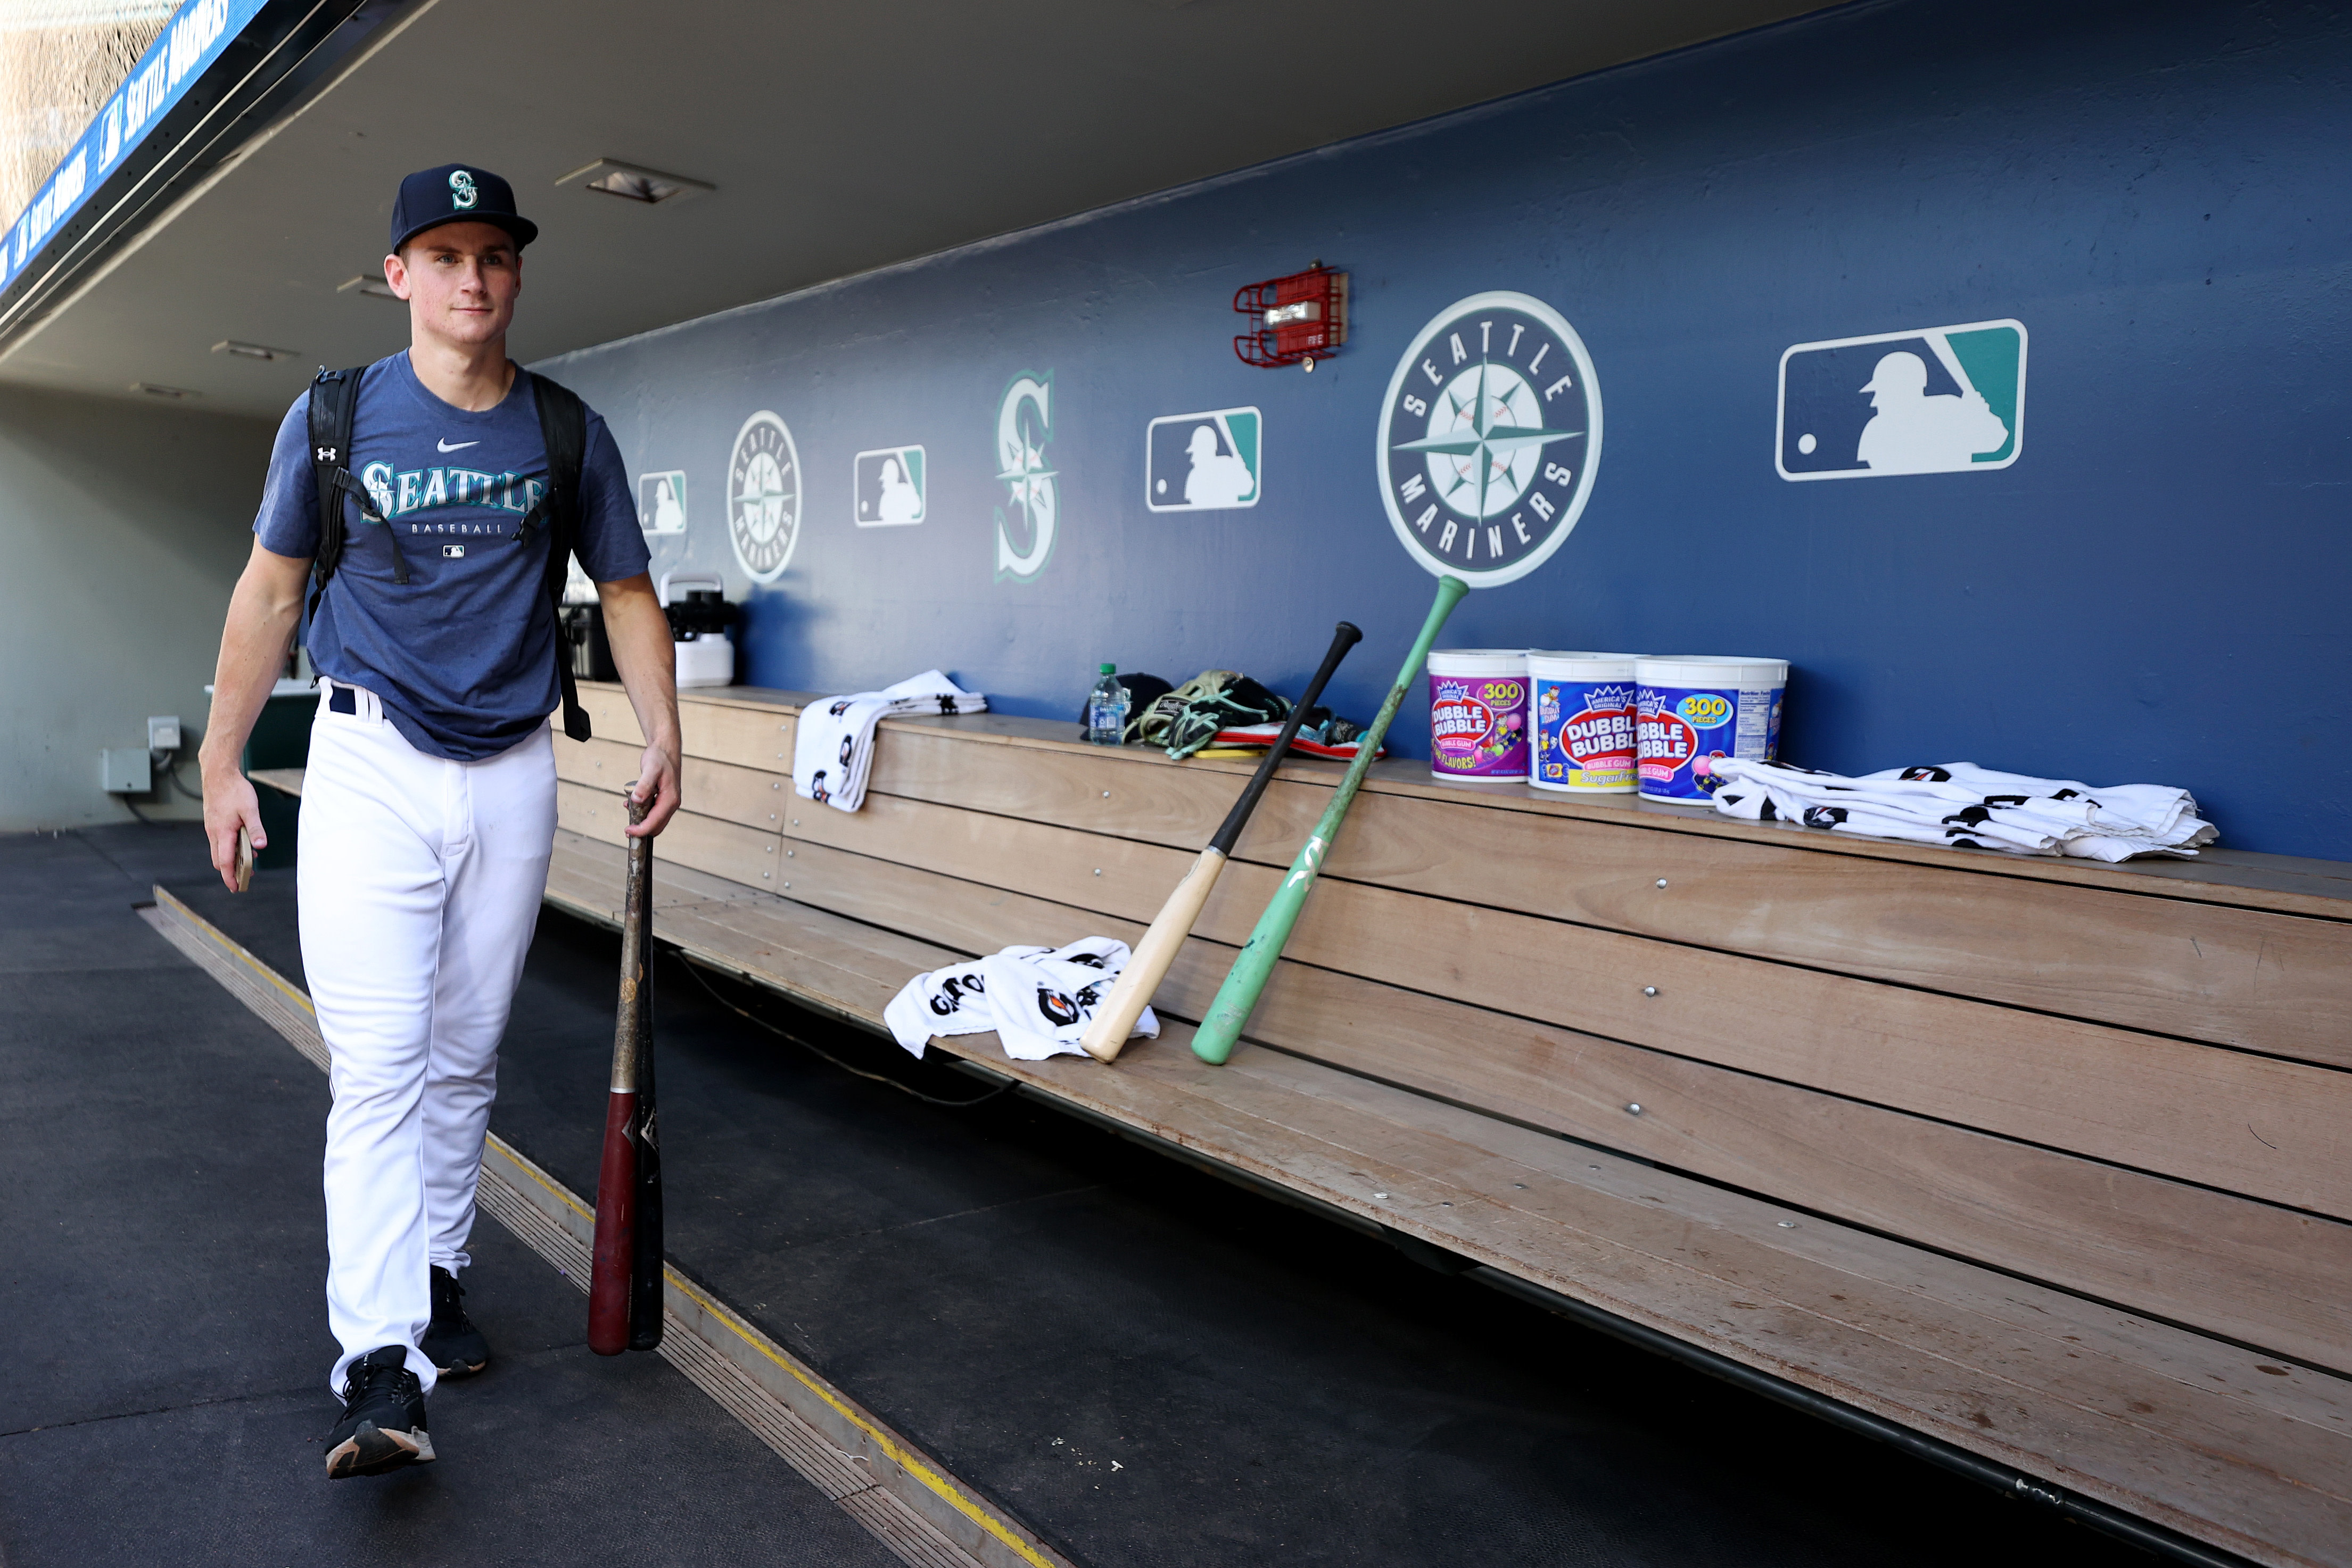 Kyle Seager MLB: Longtime Mariner for 11 seasons announces his